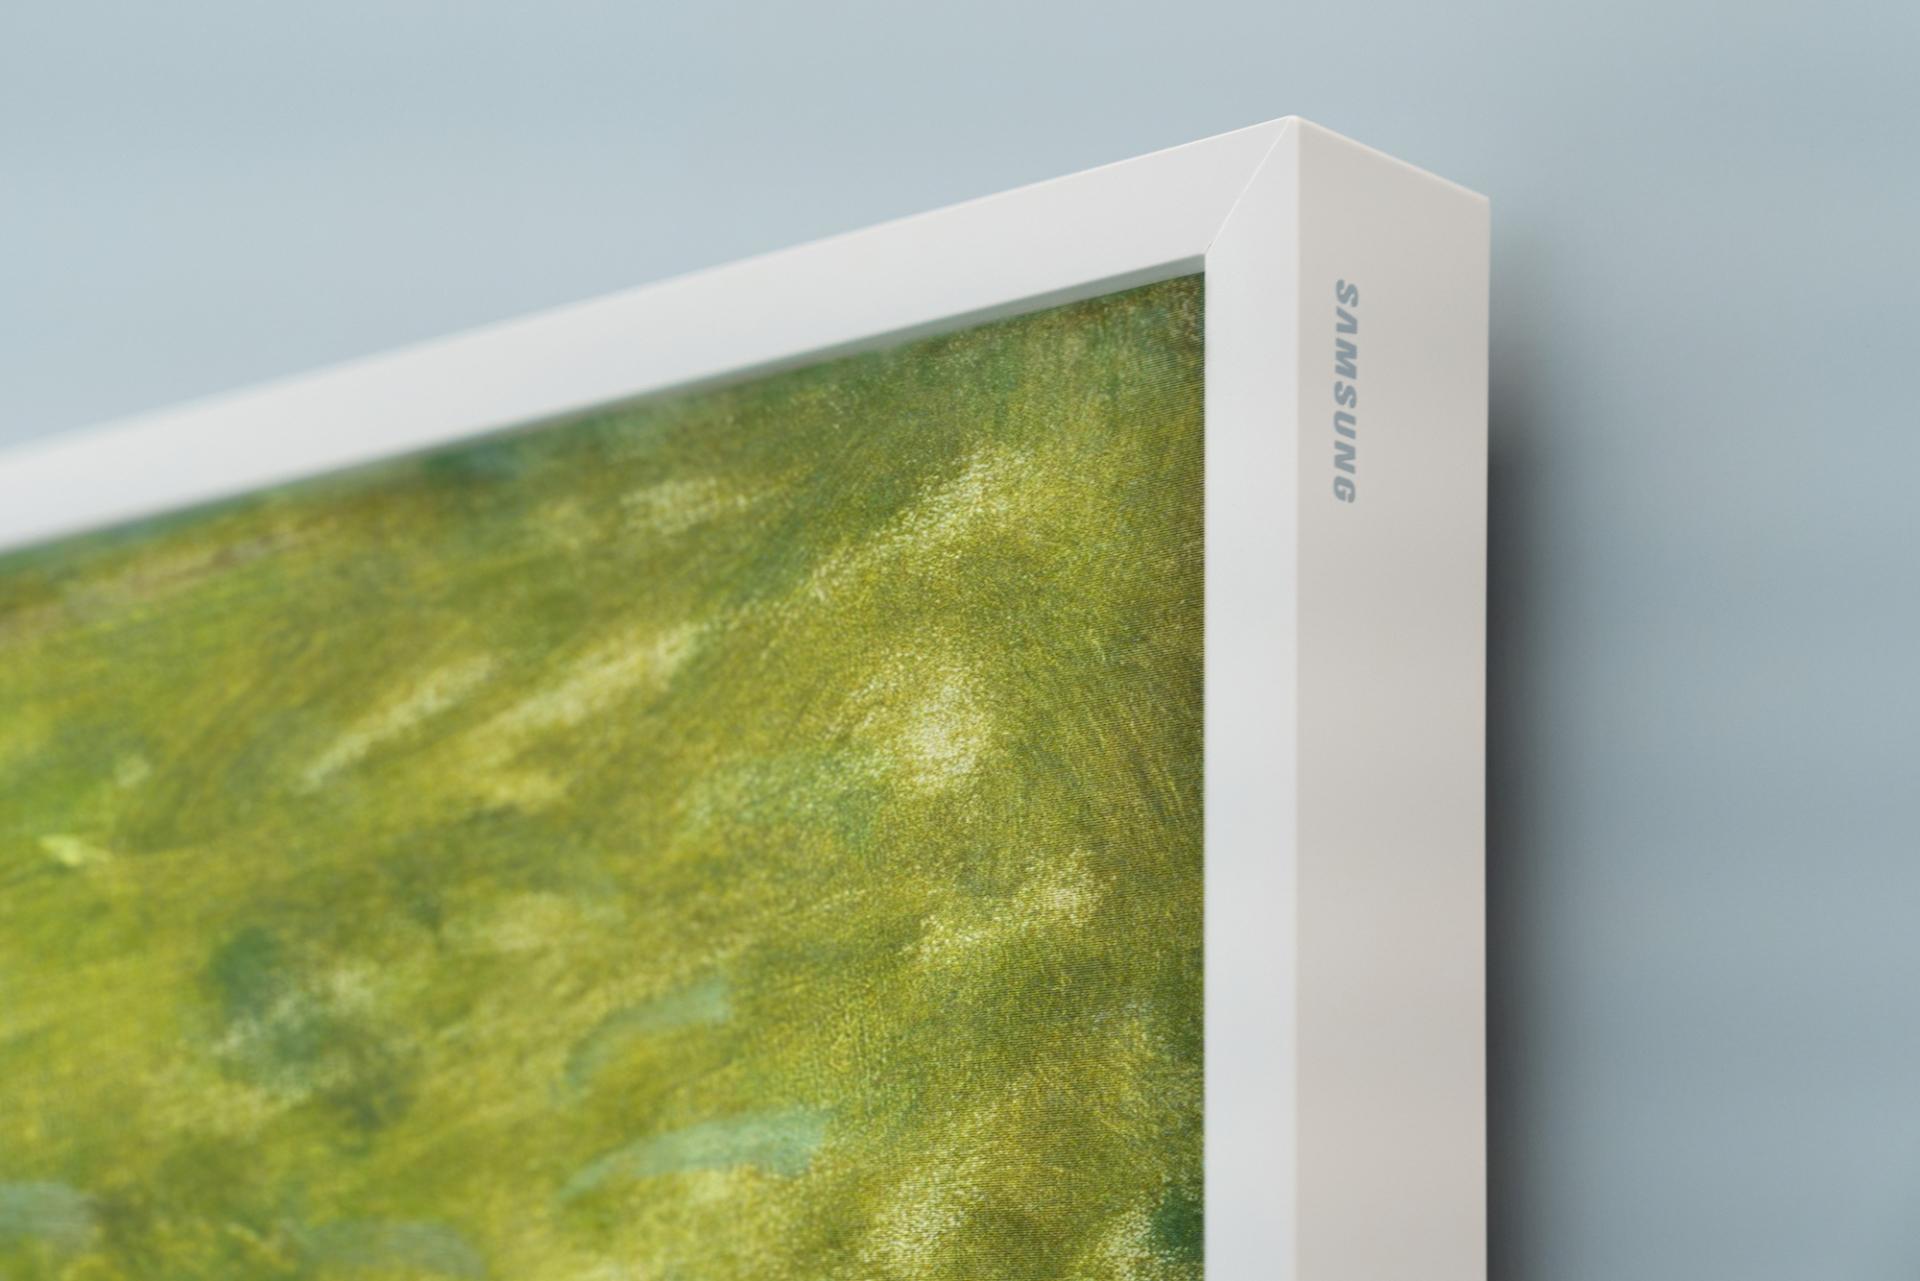 The Frame TV by Samsung Turns Your Home Into an Art Gallery 